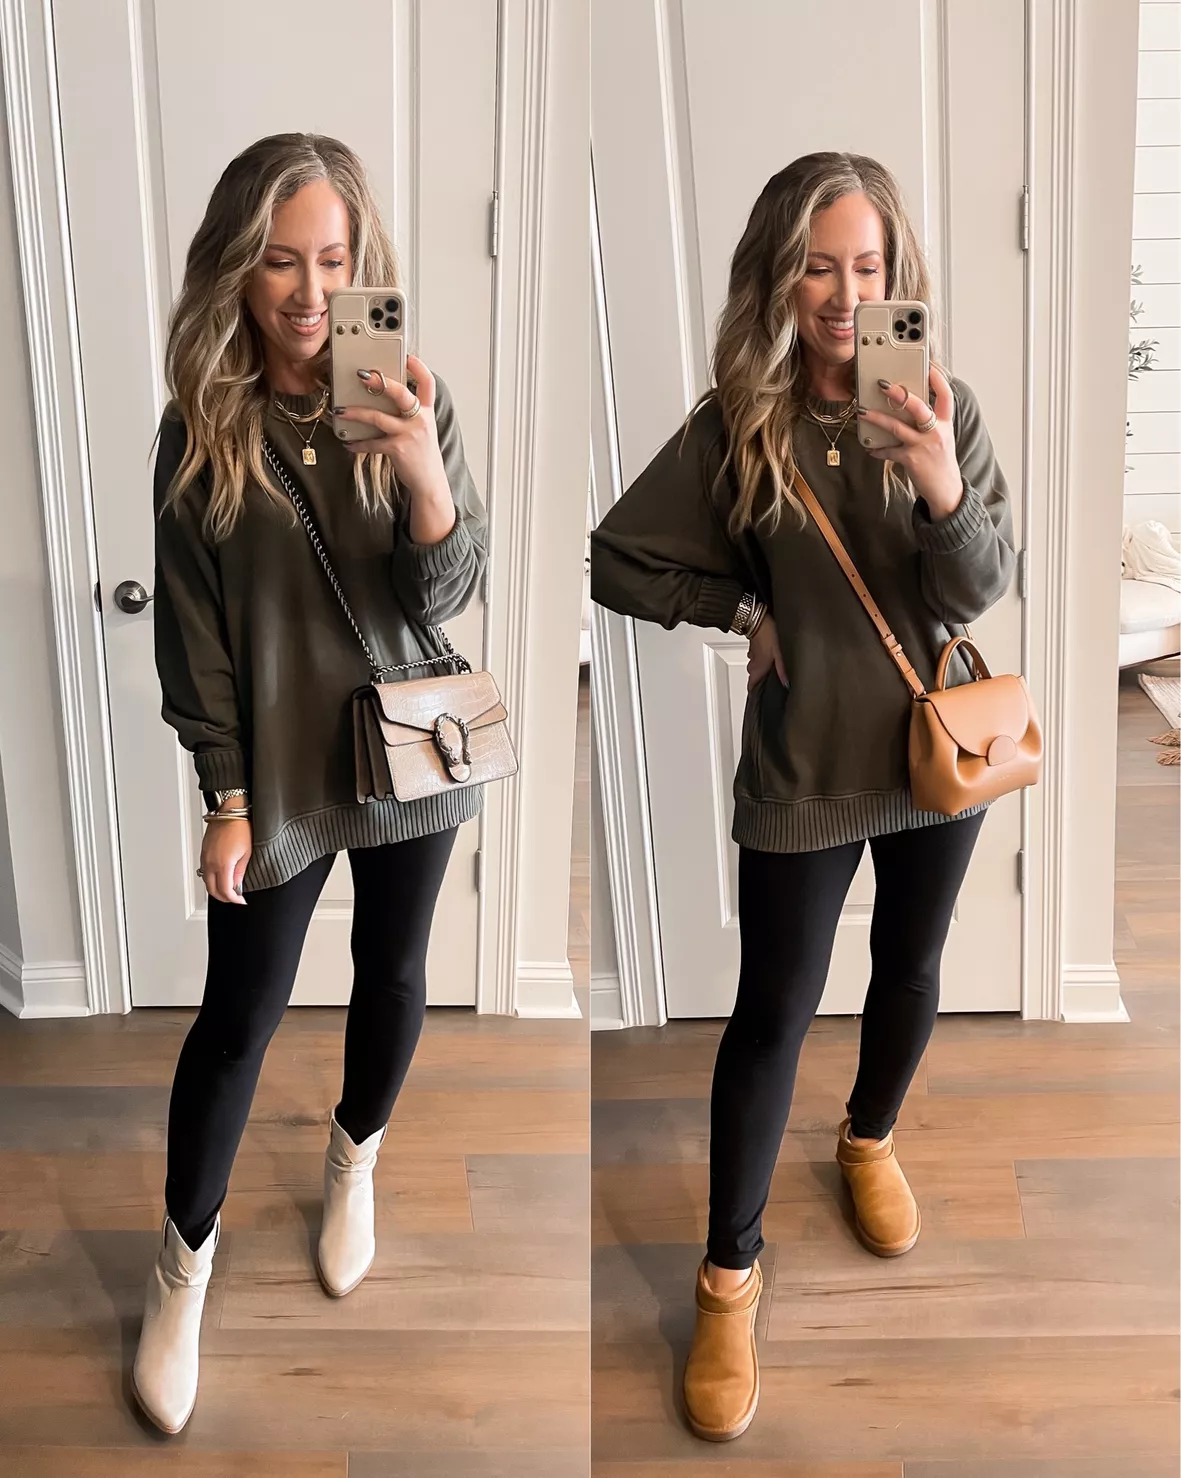 Oversized sweater with leggings  Outfits with leggings, Olive leggings,  Green leggings outfit